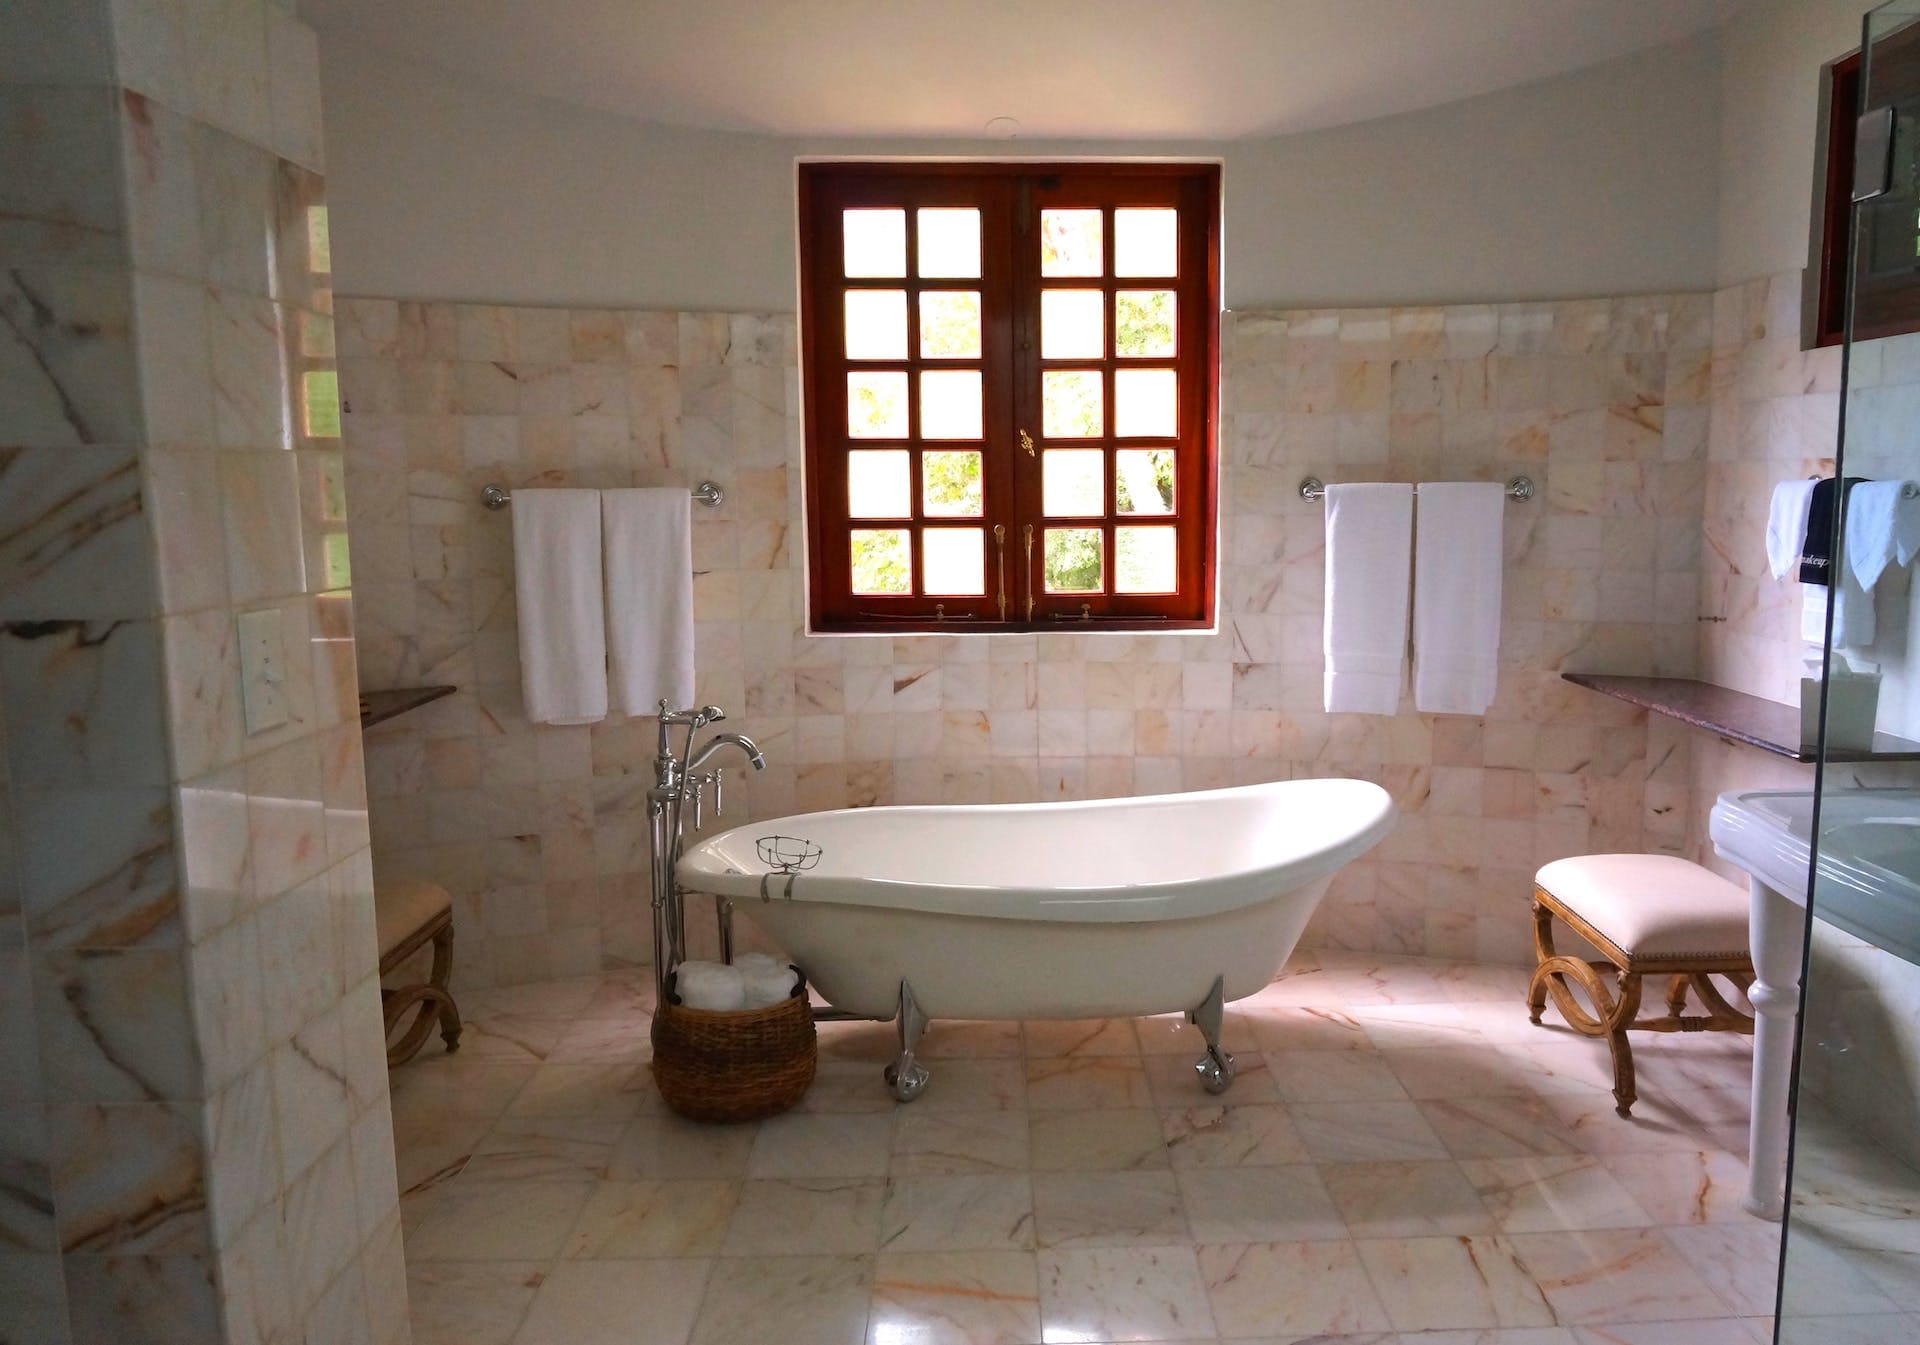 Transforming Spaces: A Comprehensive Guide to Remodeling Your Bathroom